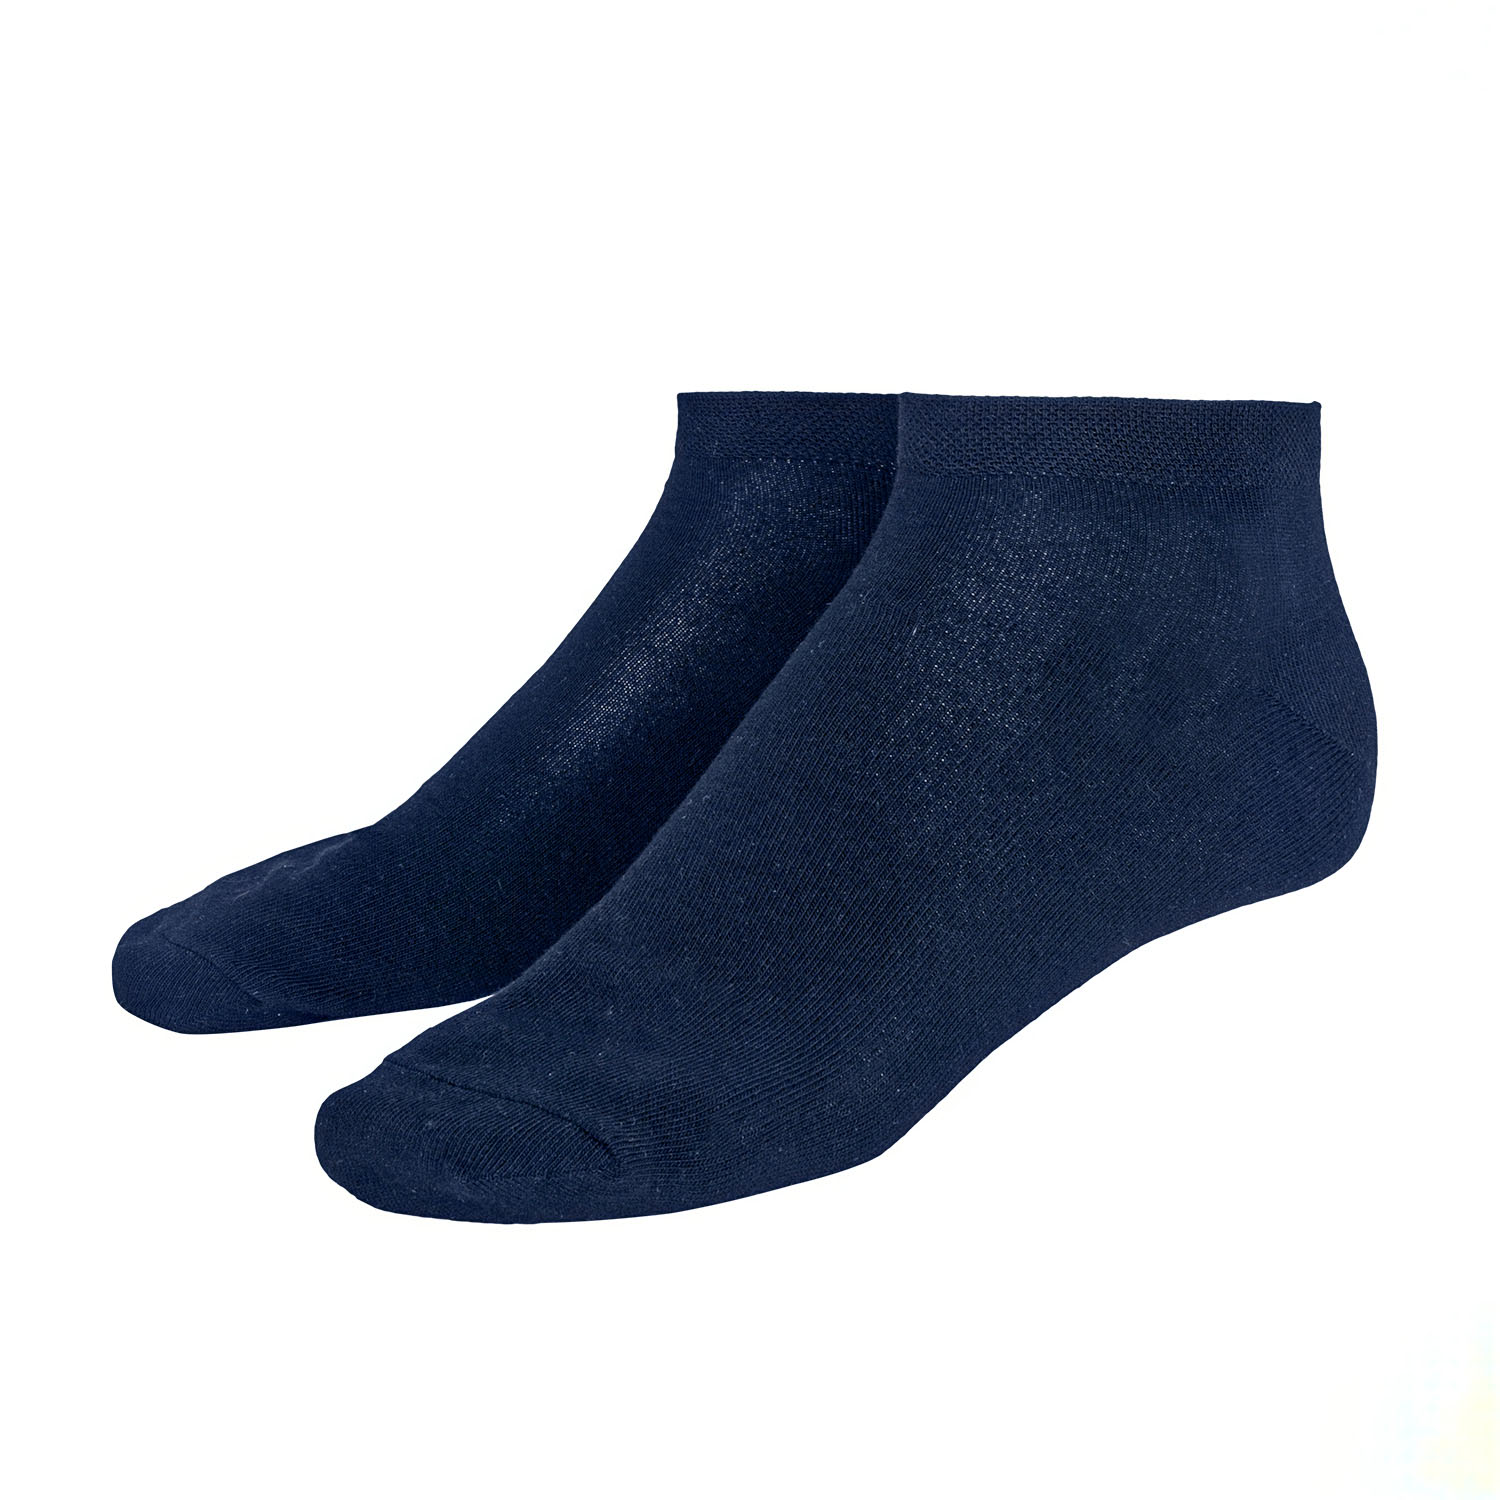 Men's sneaker socks in navy pack of four up to size 51/54